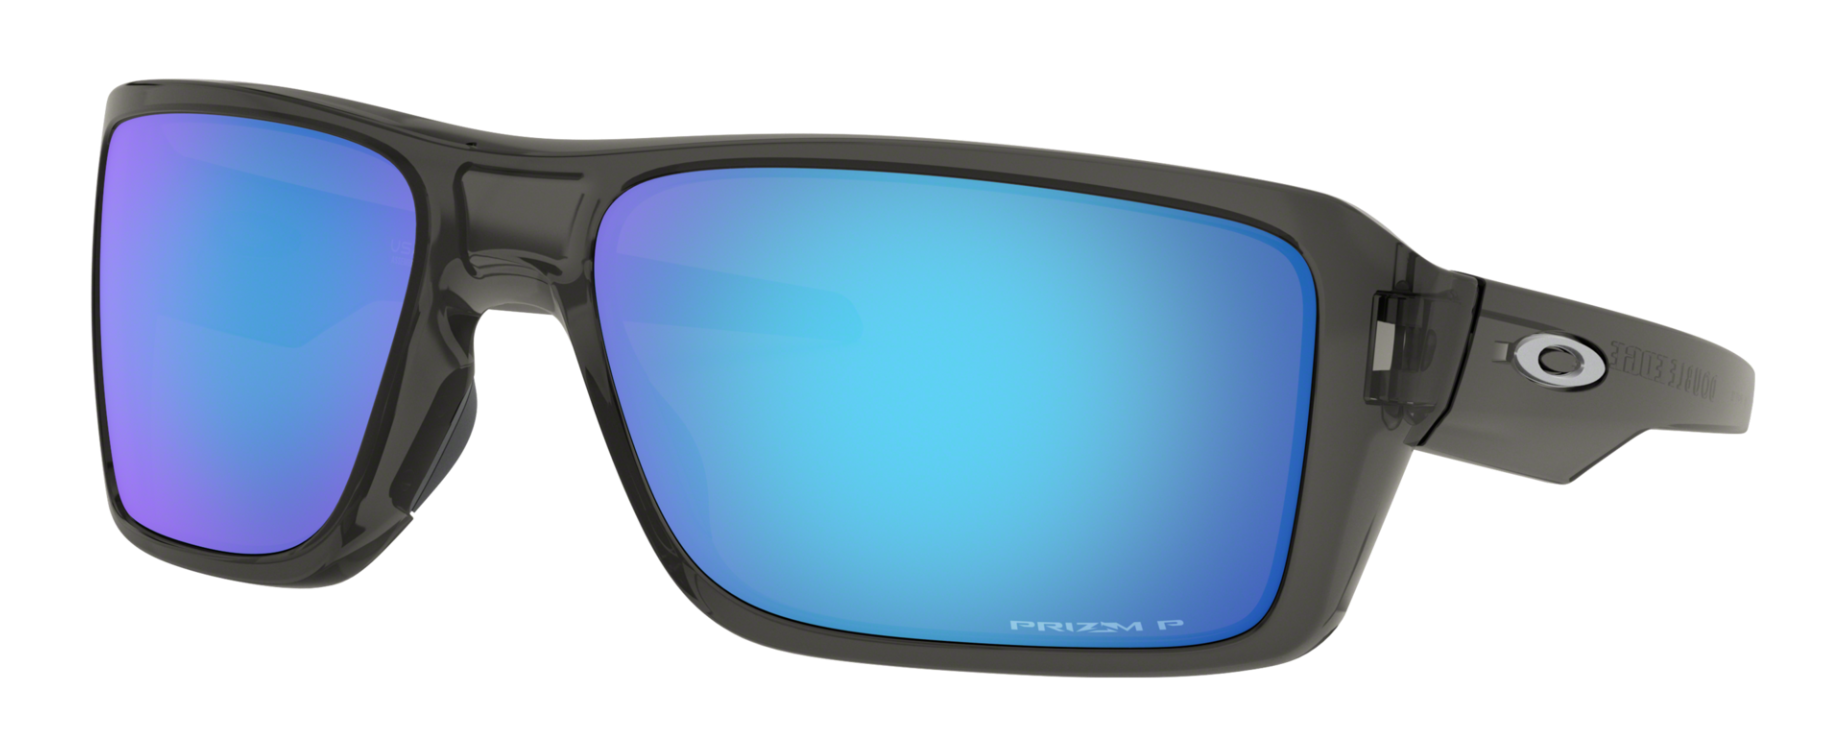 Oakley Double sunglasses in grey with polarized blue lenses.